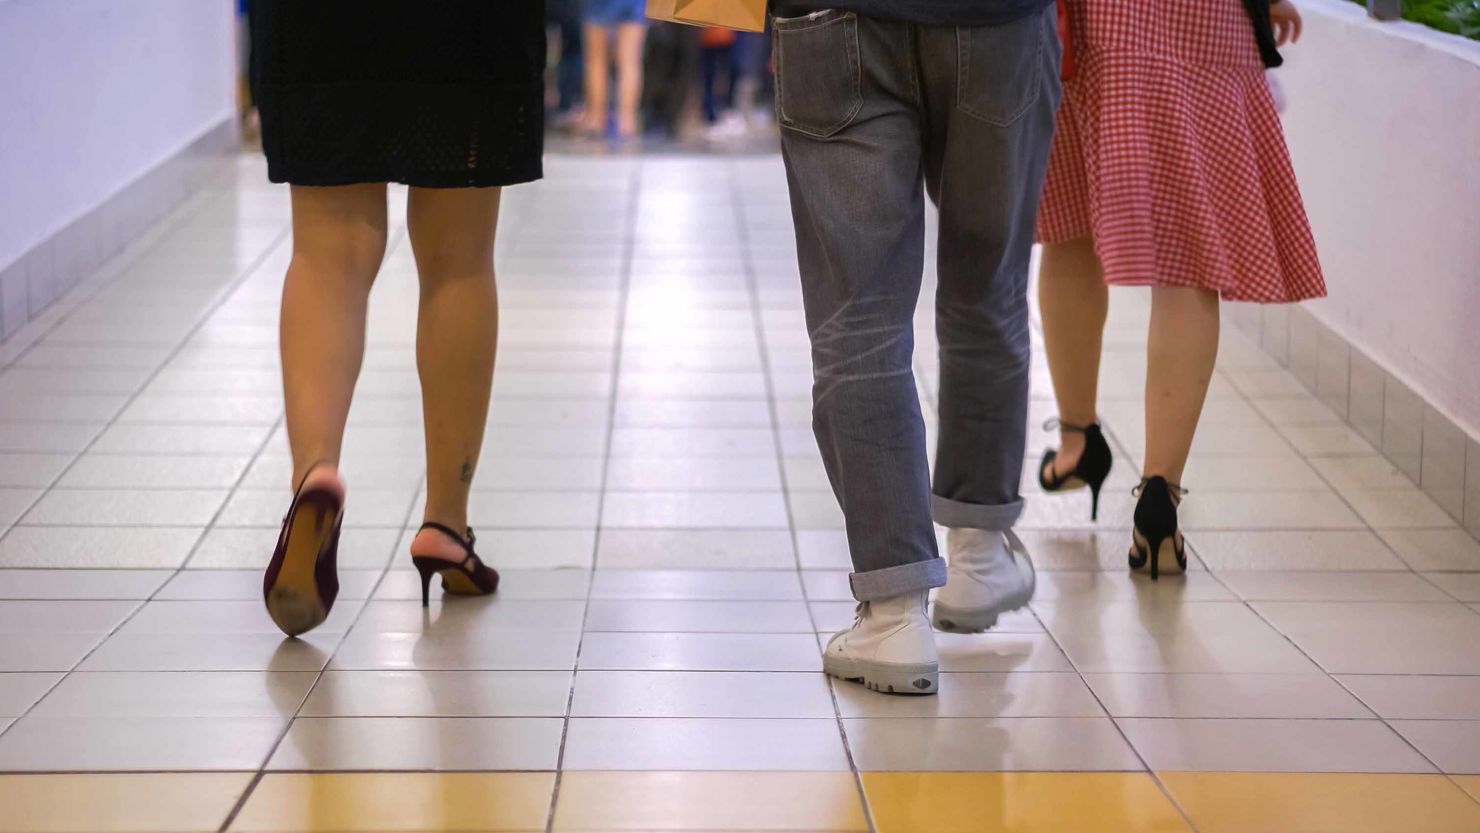 The UK government is backing a law to criminalize upskirting.